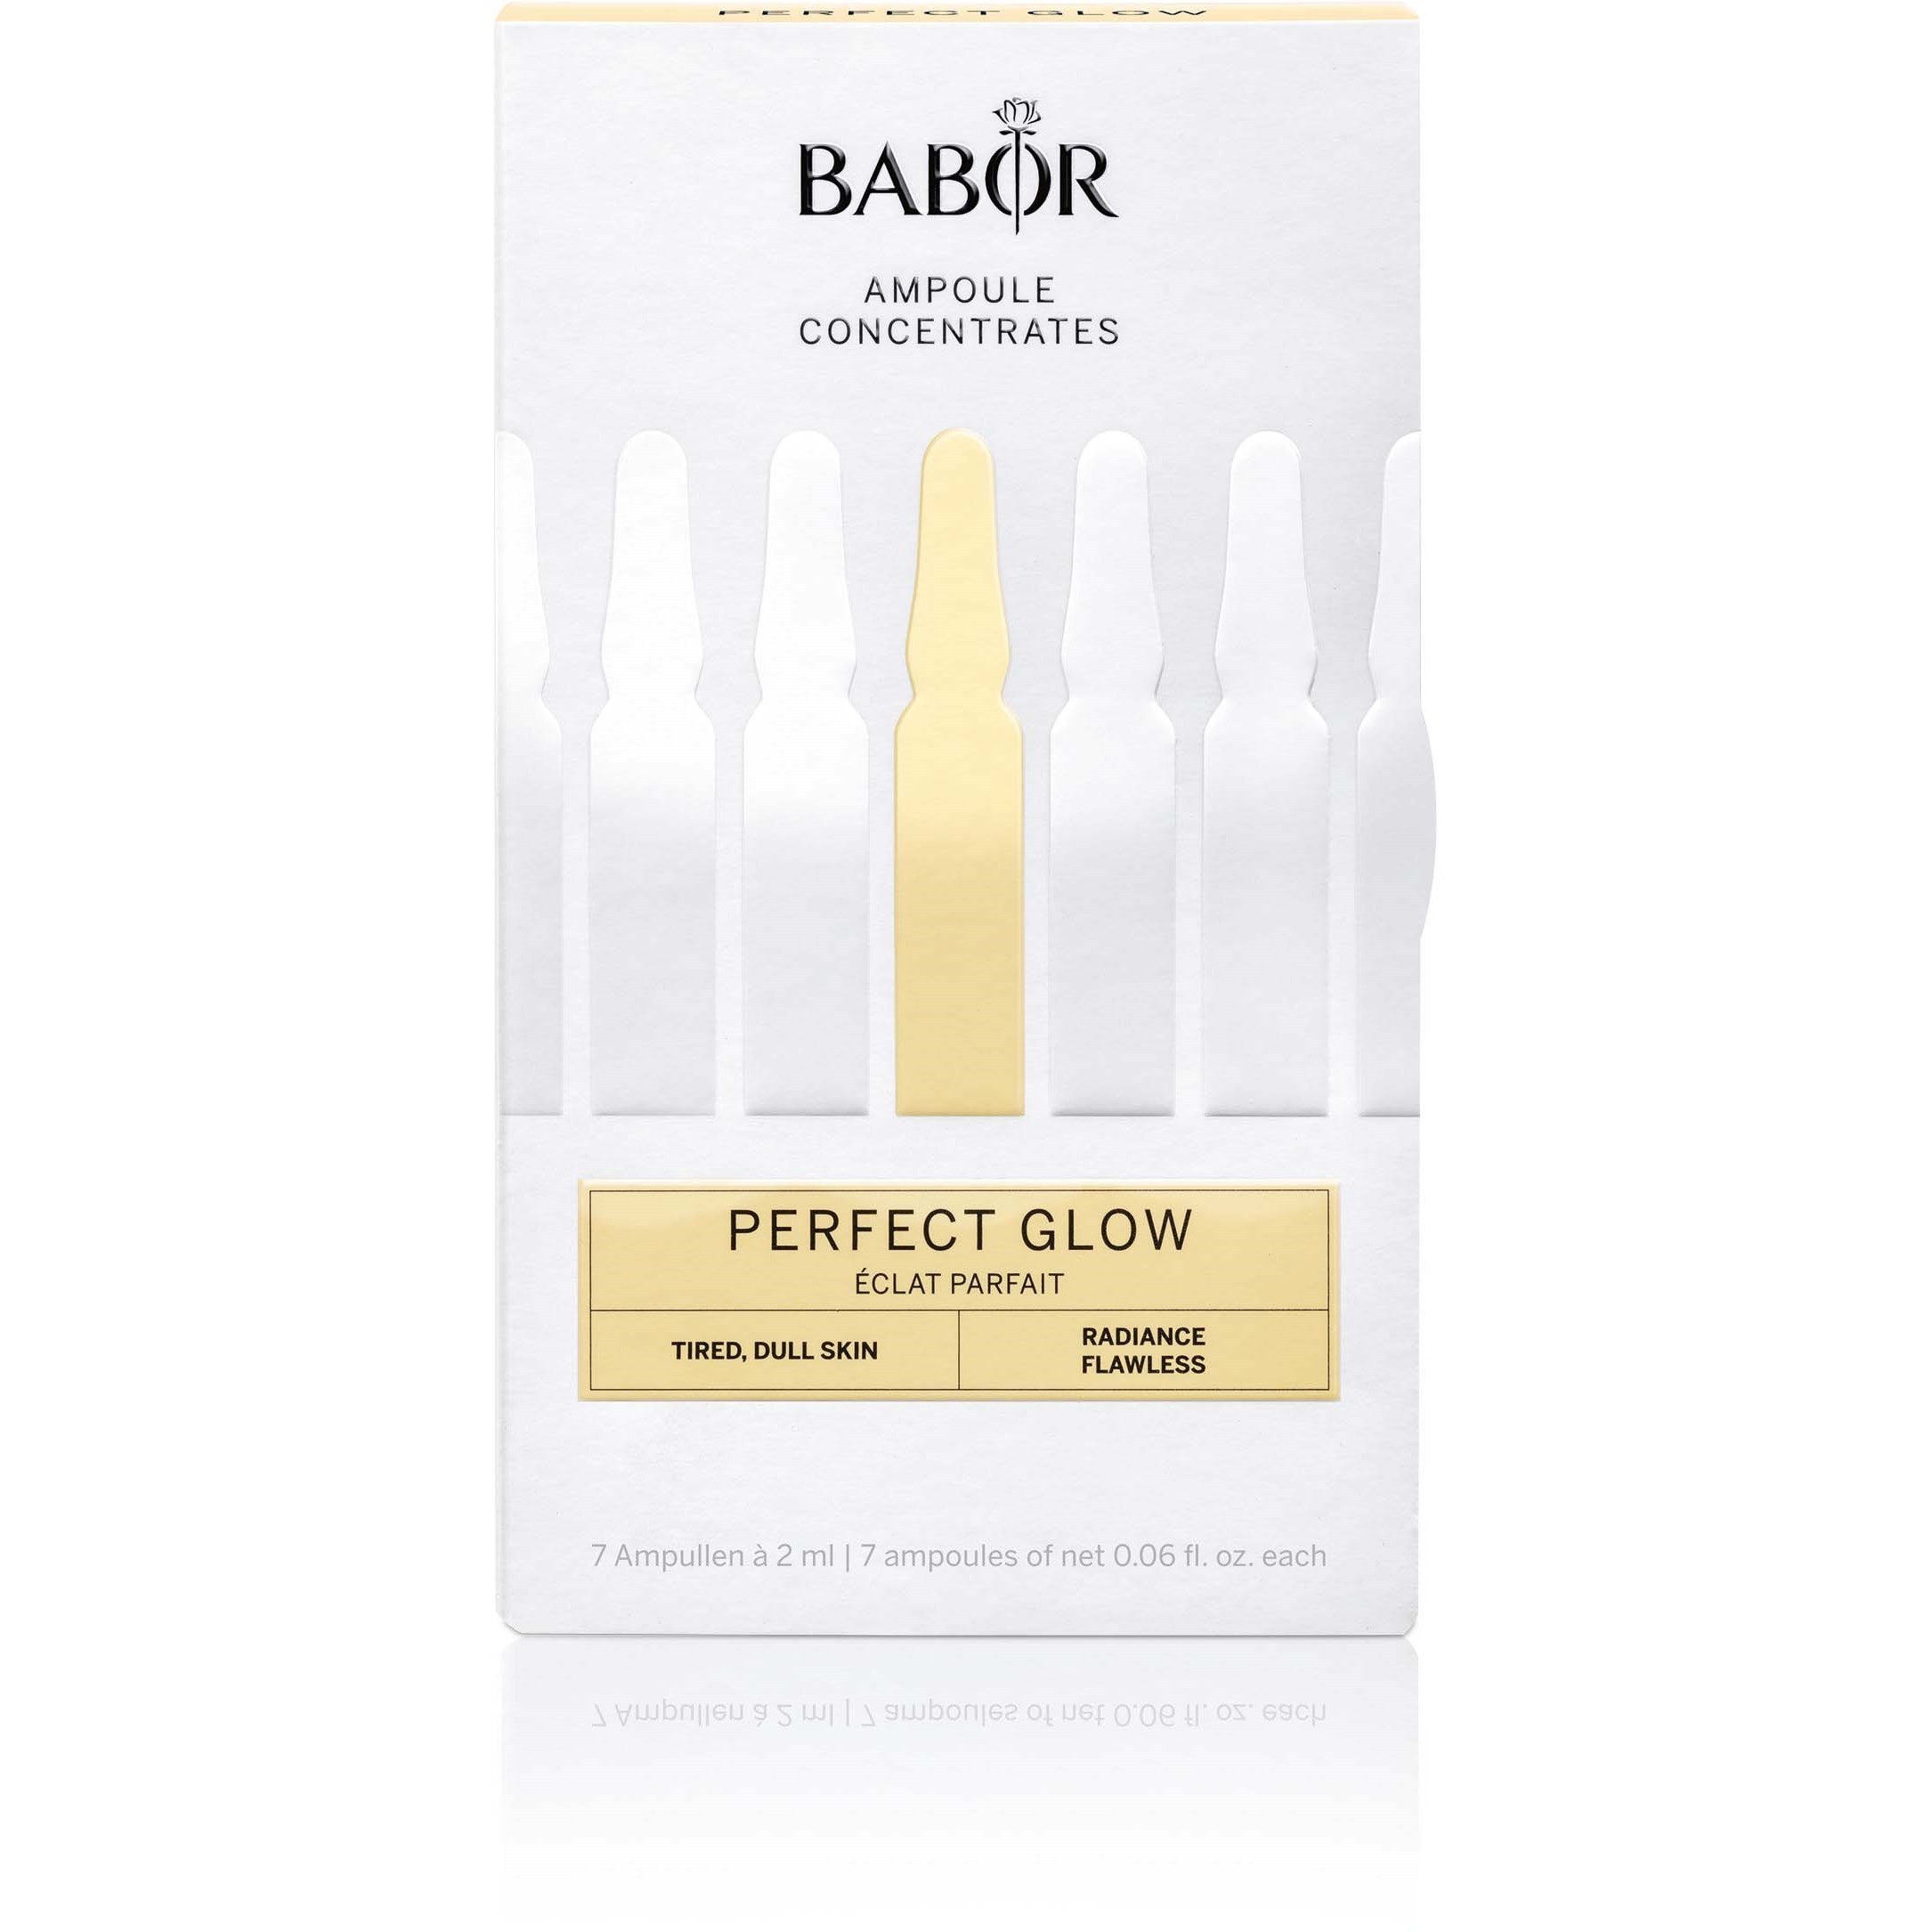 Läs mer om BABOR Ampoule Concentrates Perfect Glow 14 ml